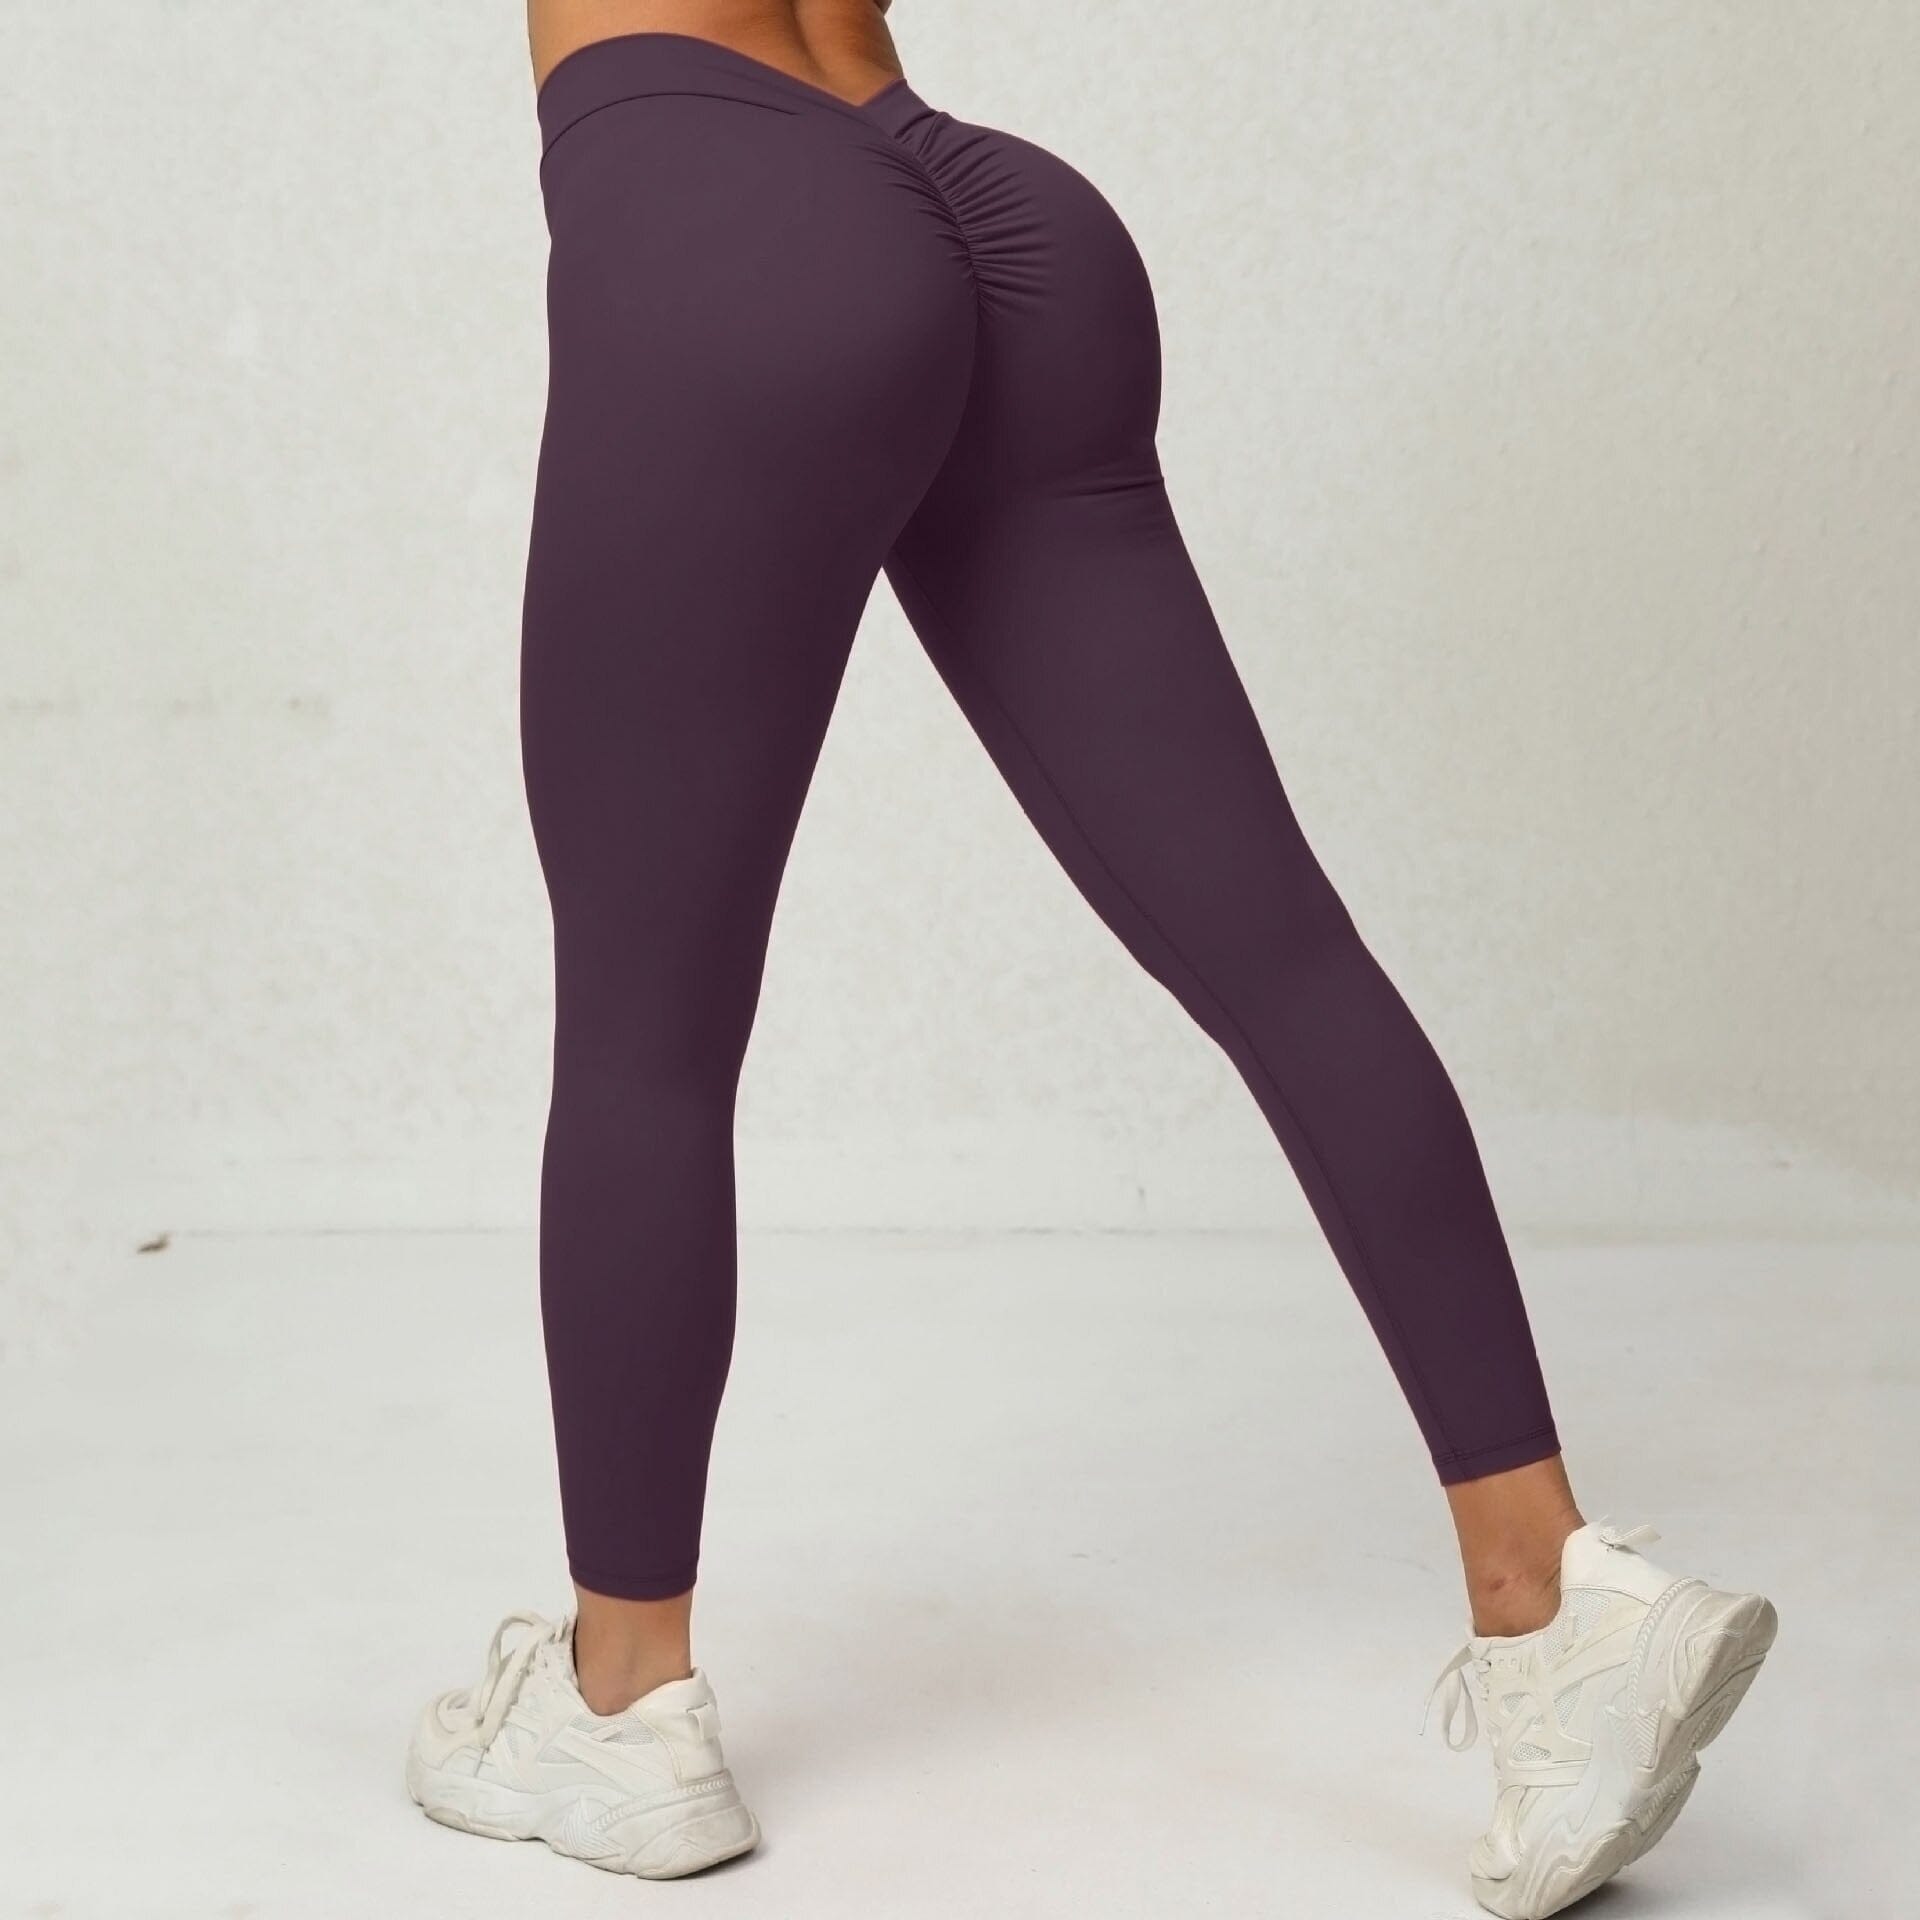 Athletics Motion on Instagram: 💫 Gym-Ready Confidence: Magic Waist Shaper  Leggings & Impress Top - The Unbeatable Duo! 💪🏋️‍♀️ From the gym to  everywhere you go, this duo has your back. Slip